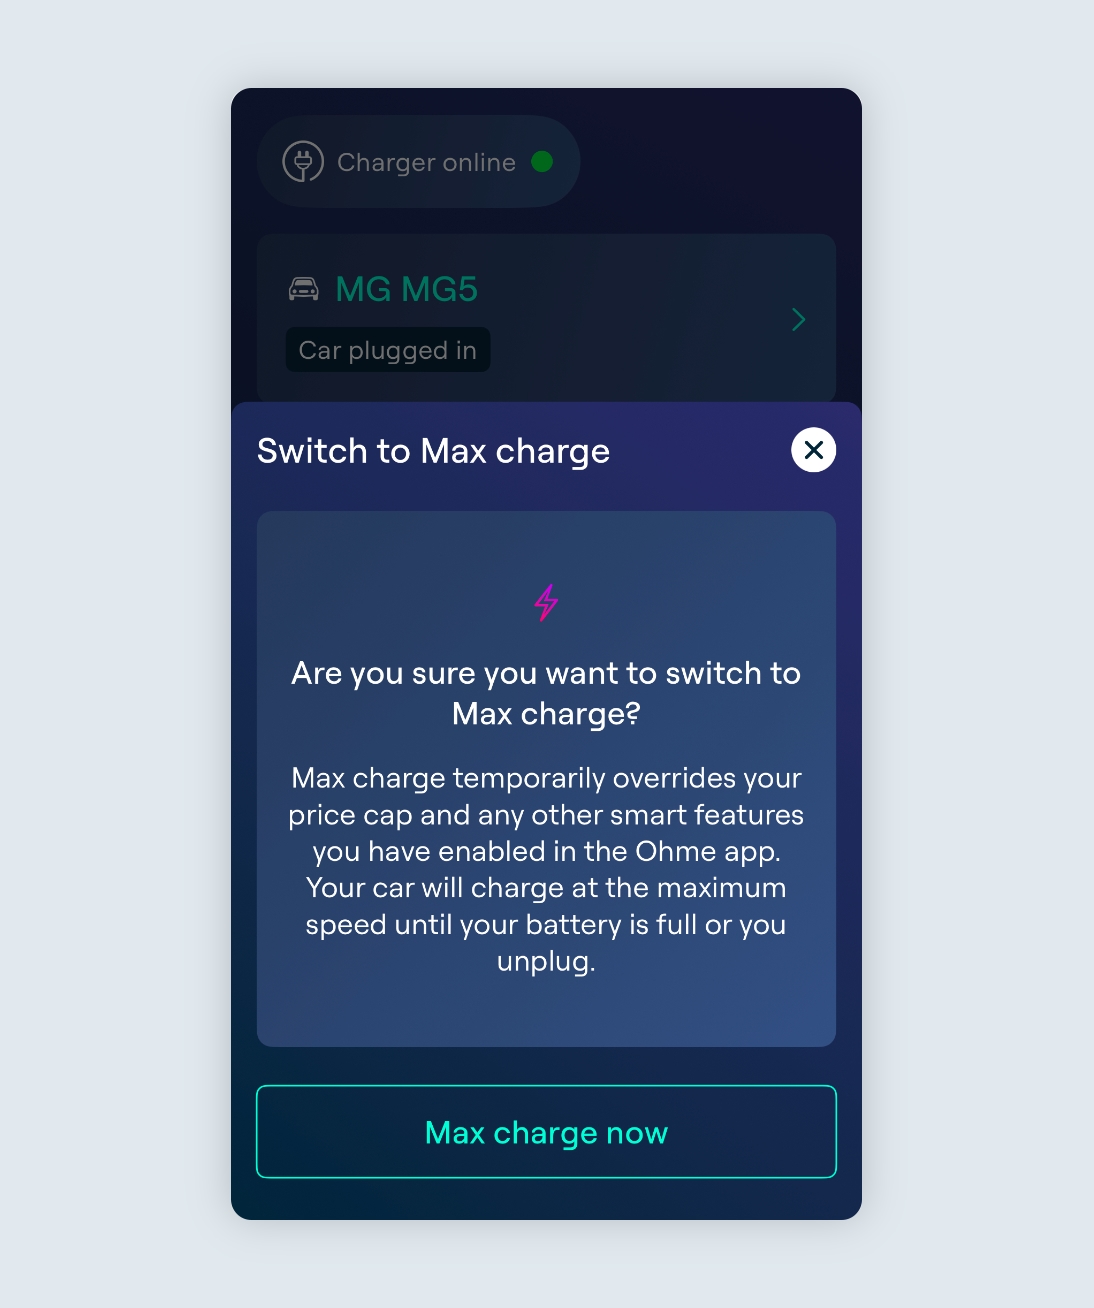 Switch to max charge information alert